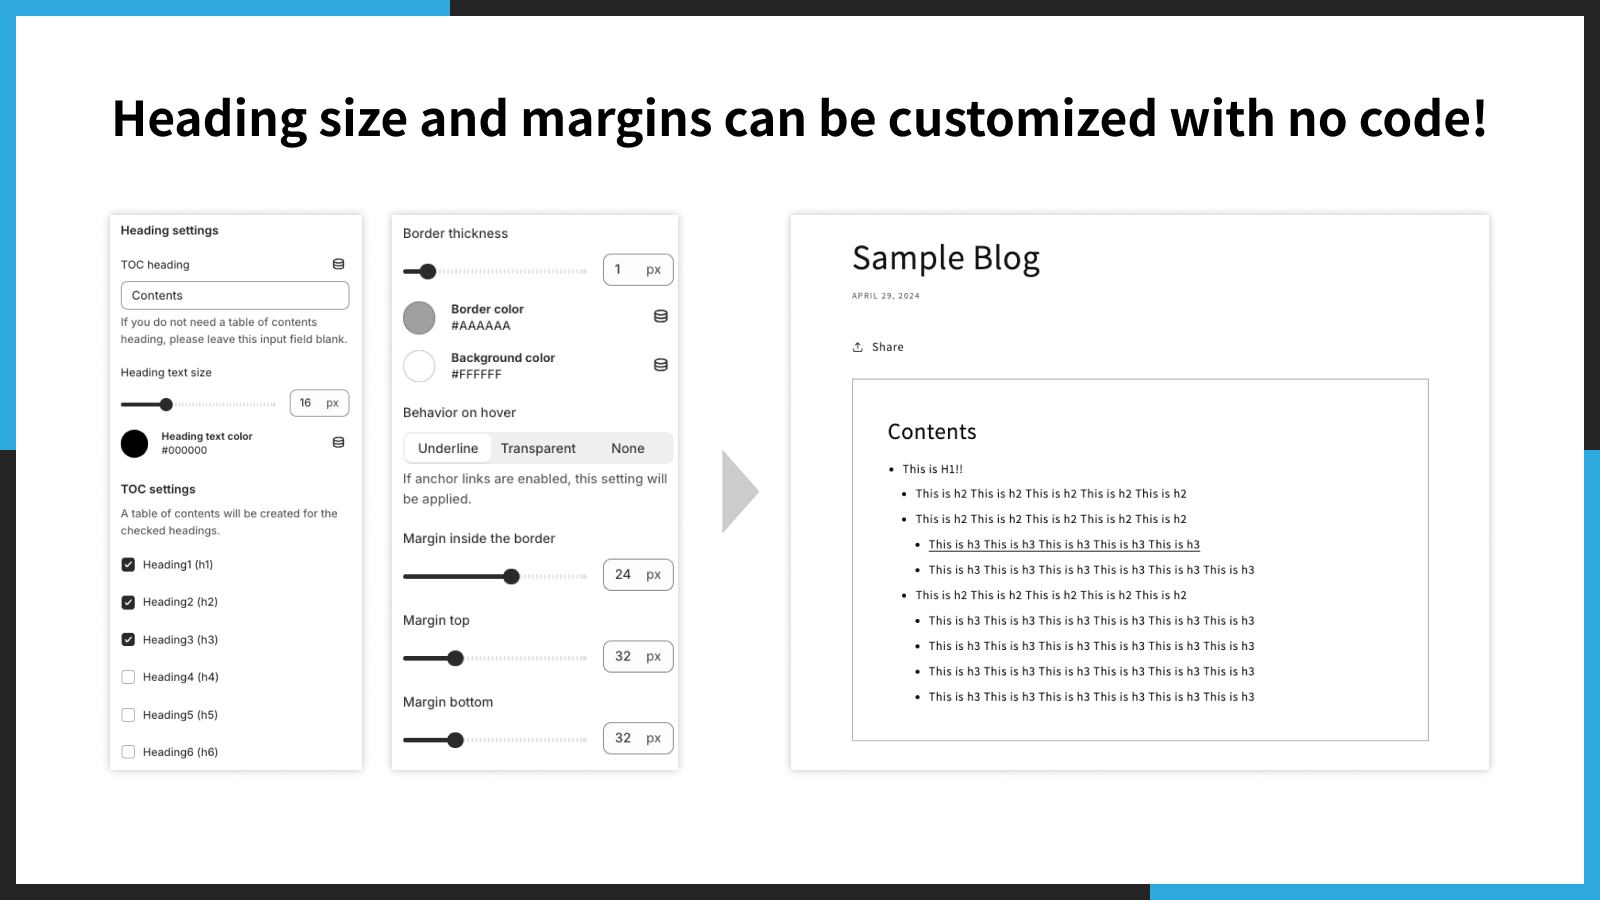 Heading size and margins can be customized with no code!